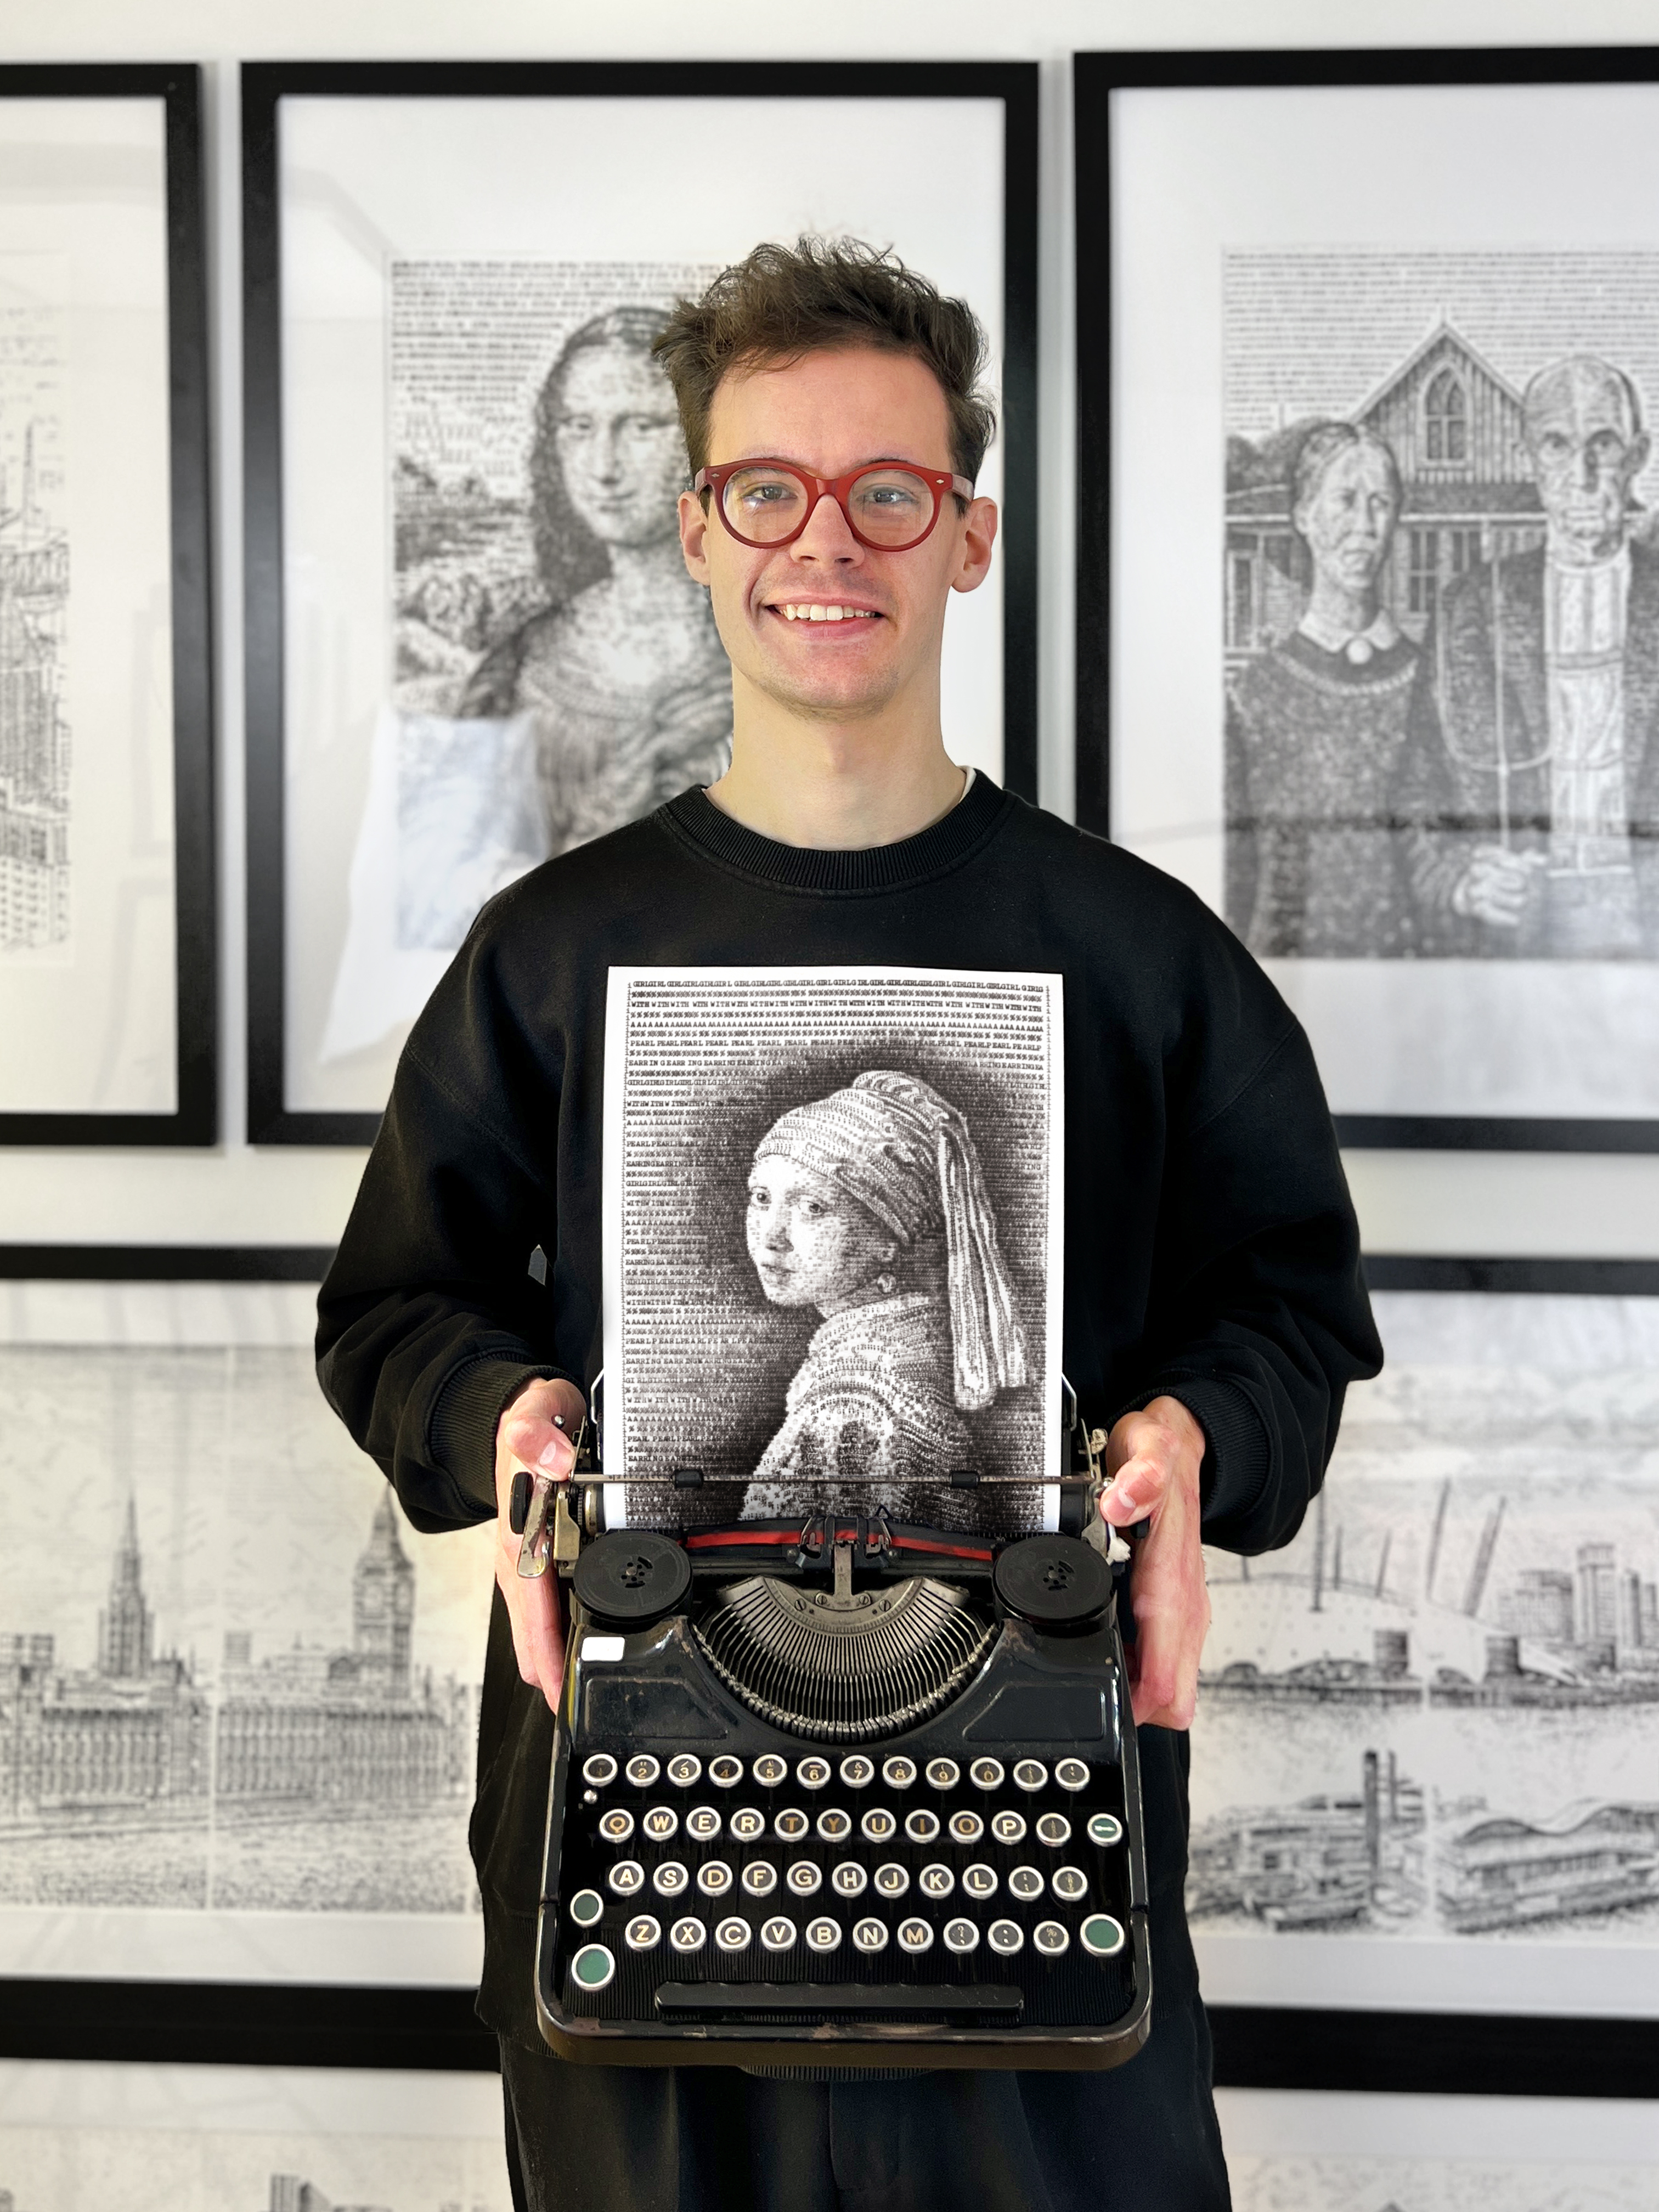 Man smiling with a typewriter in his hand